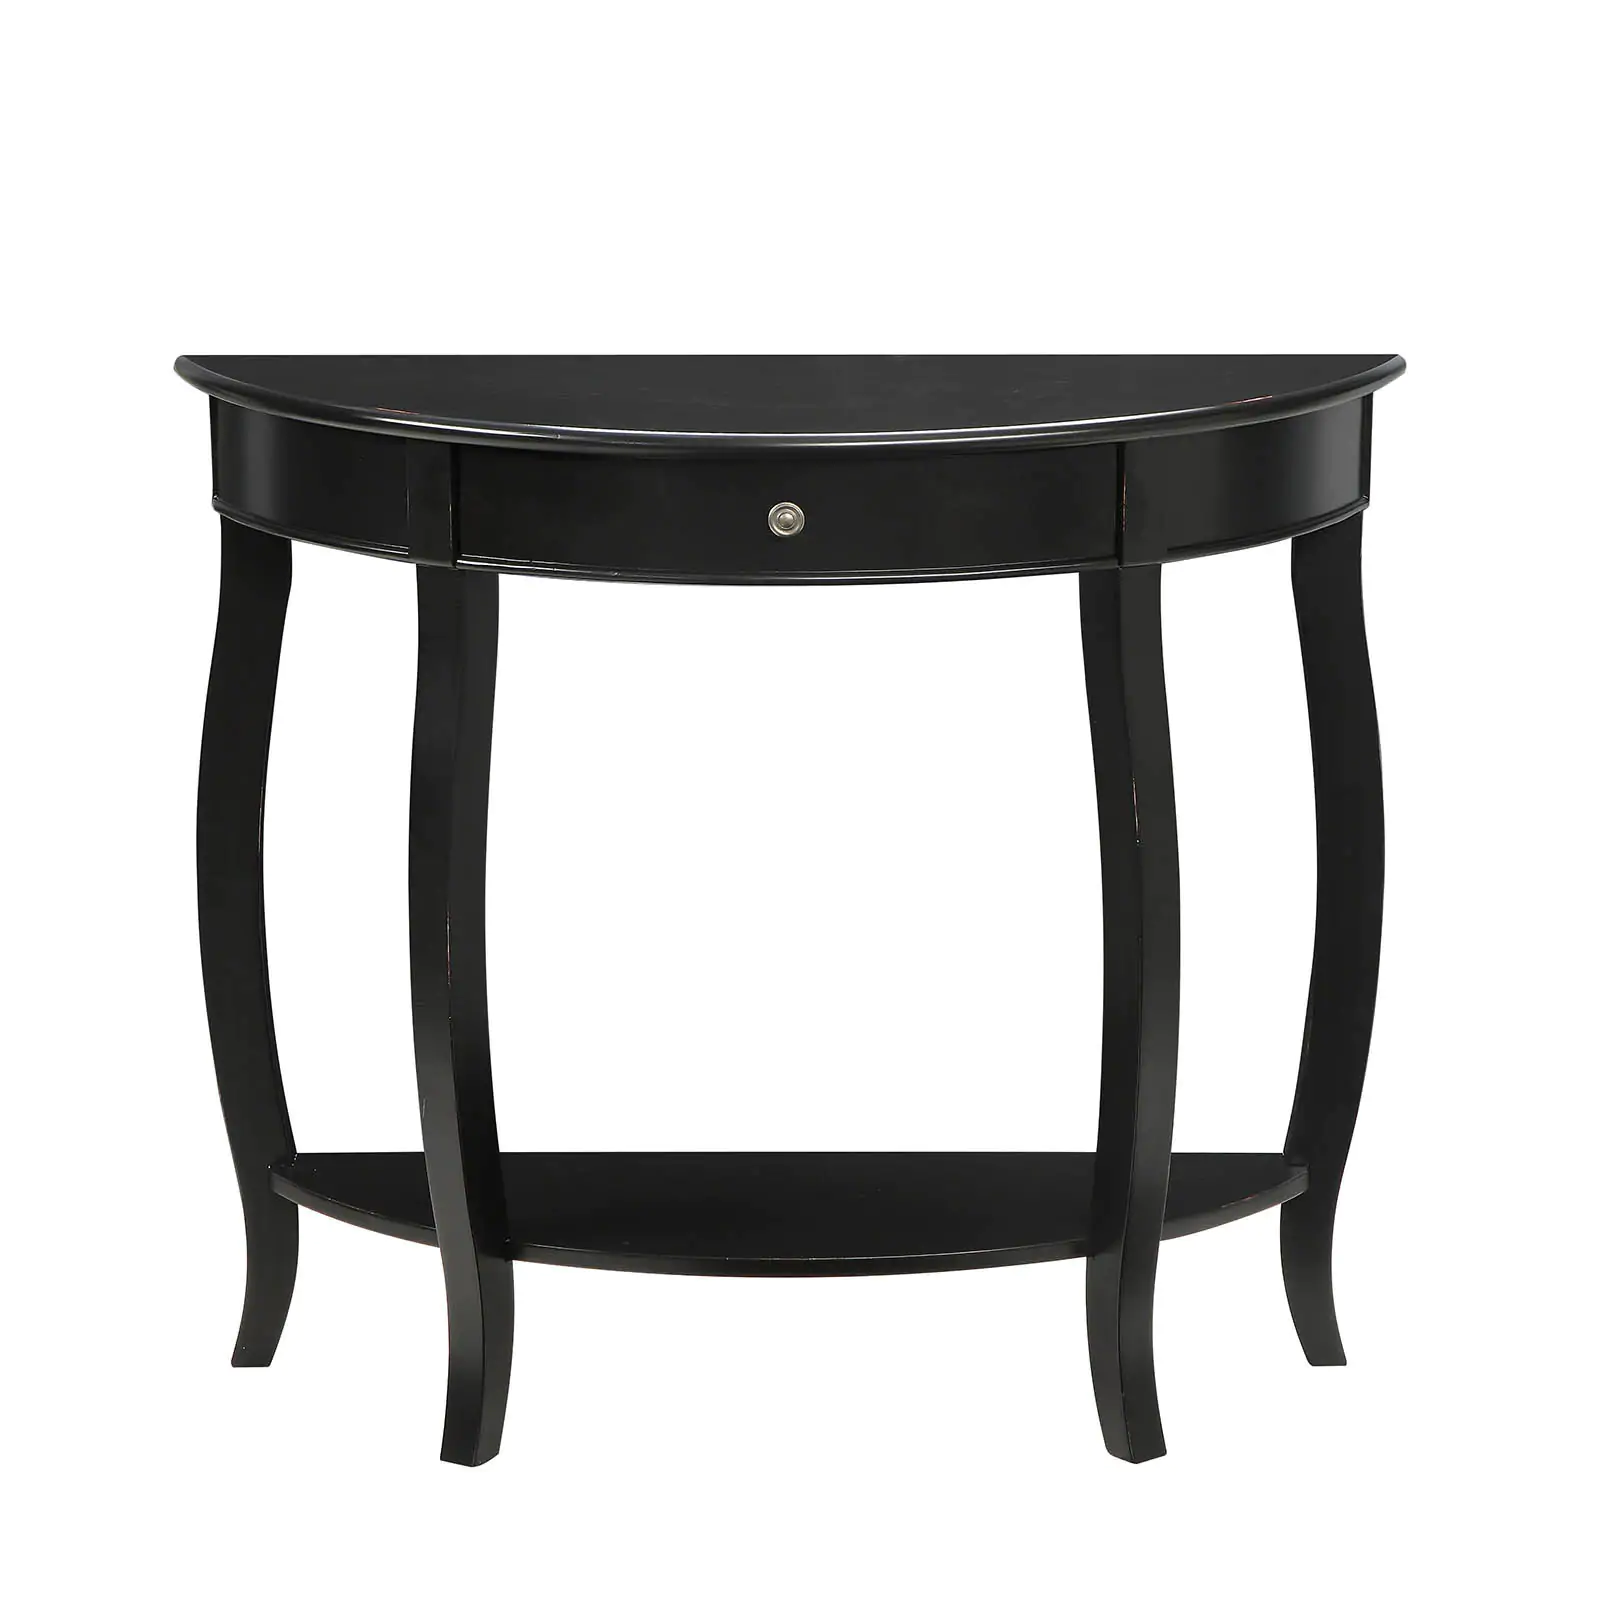 yvonne half moon console table with drawer antique black small accent free shipping today round fireplace chairs trunk coffee ikea chinese ceramic lamp media storage end white